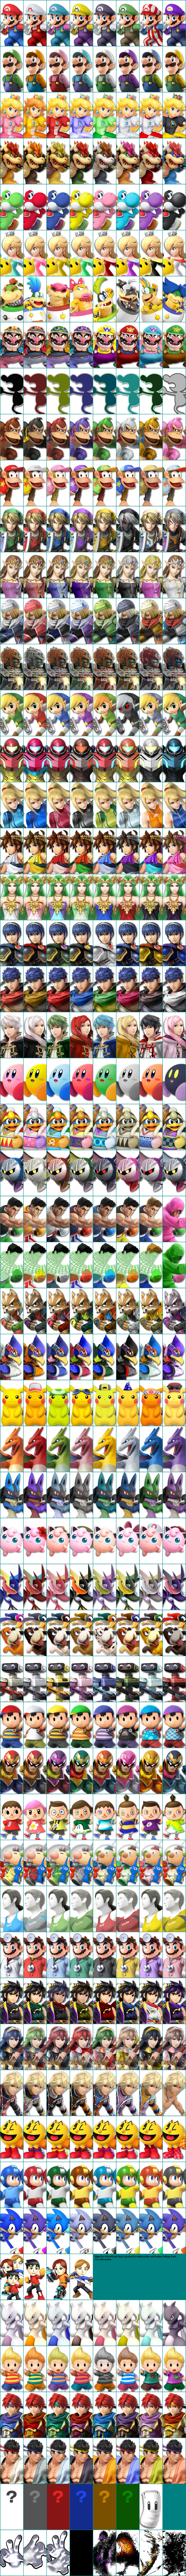 Super Smash Bros. for Nintendo 3DS - Character Busts